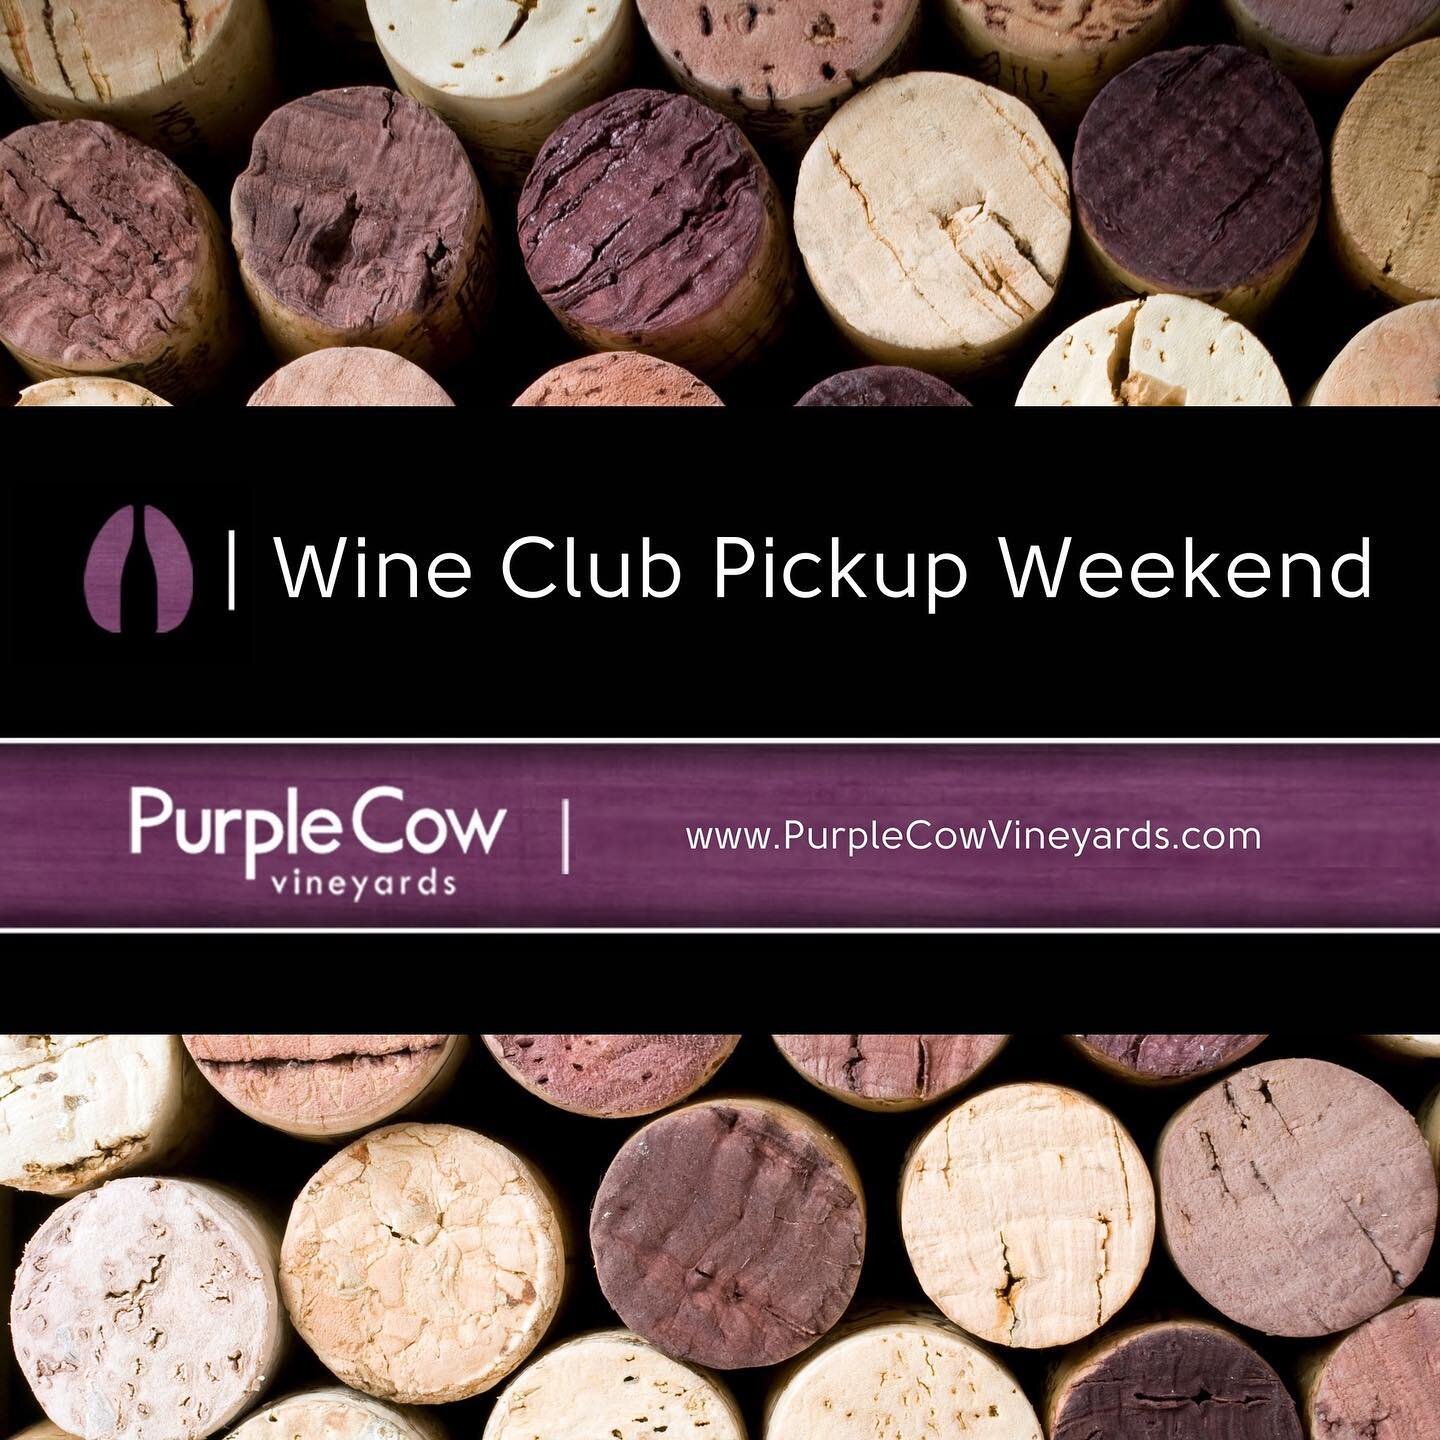 Wine Club Pickup Weekend is HERE!

Come to enjoy your club perks with us at the @kristinhillwinery Tasting Room TODAY &amp; TOMORROW!

𝕋𝕒𝕤𝕥𝕖.𝔽𝕠𝕣.𝕐𝕠𝕦𝕣𝕤𝕖𝕝𝕗
#wineclub #pickupparty #wineweekend #membersonly #tastingroom #sips #clubmembers